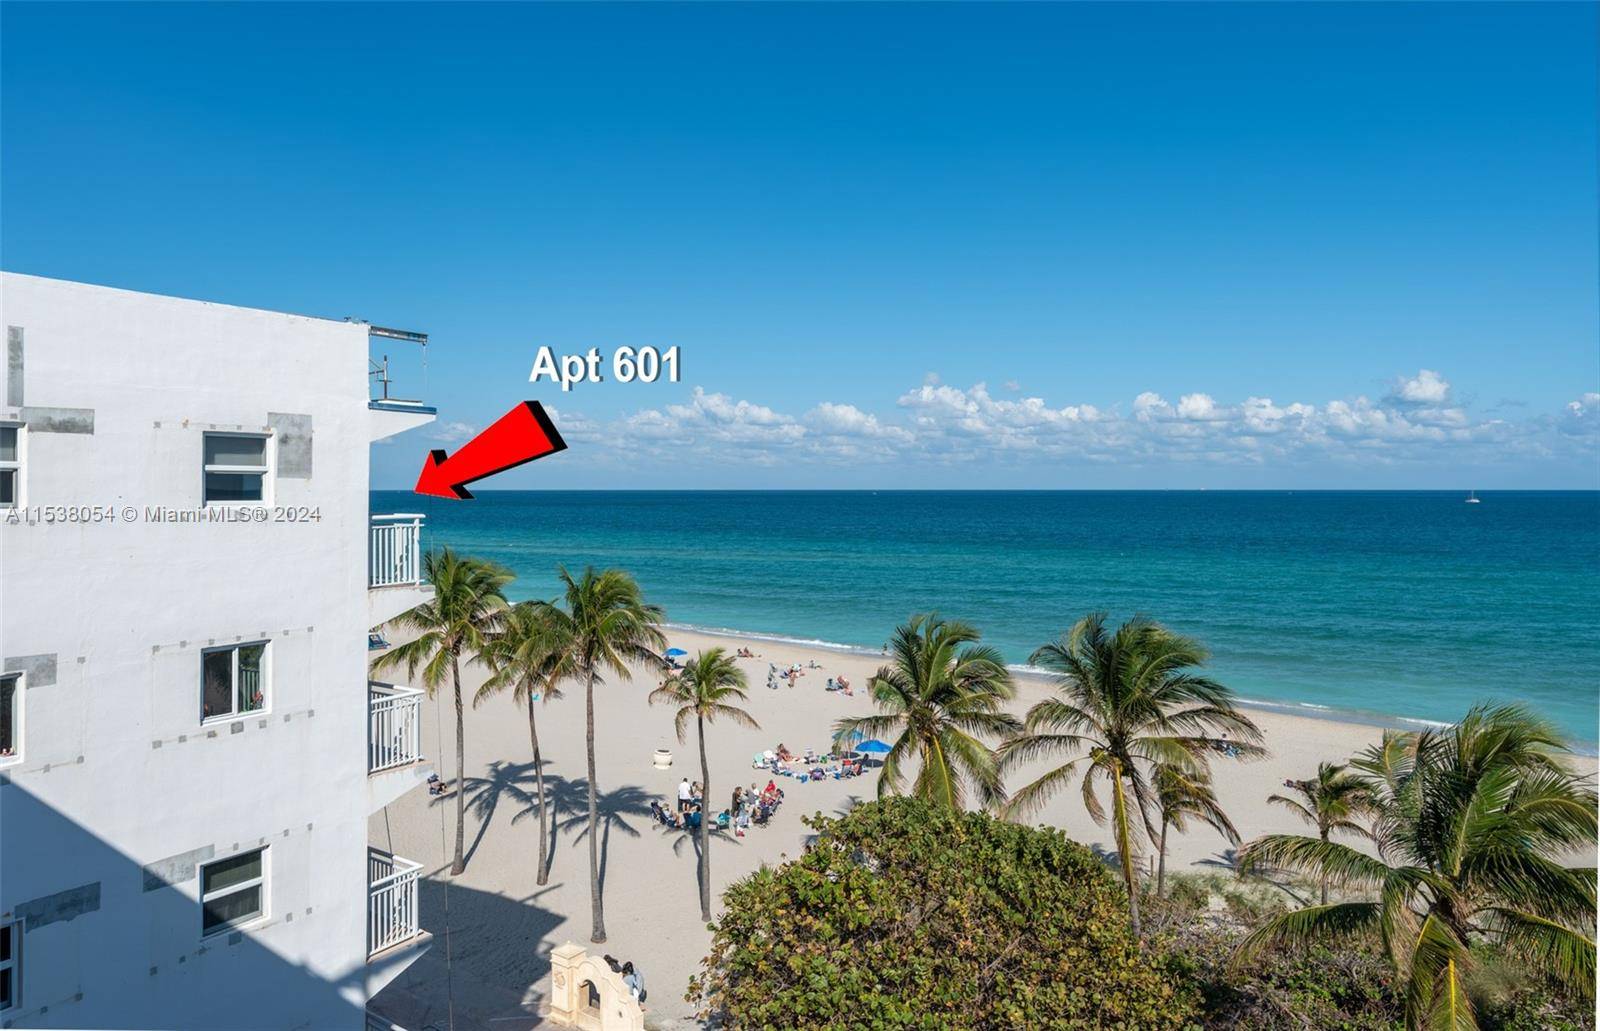 This 2 bedroom, 2 bathroom oceanfront unit on the Hollywood Beach Broadwalk offers 850 square feet of living space with an open floor plan and plenty of natural light.